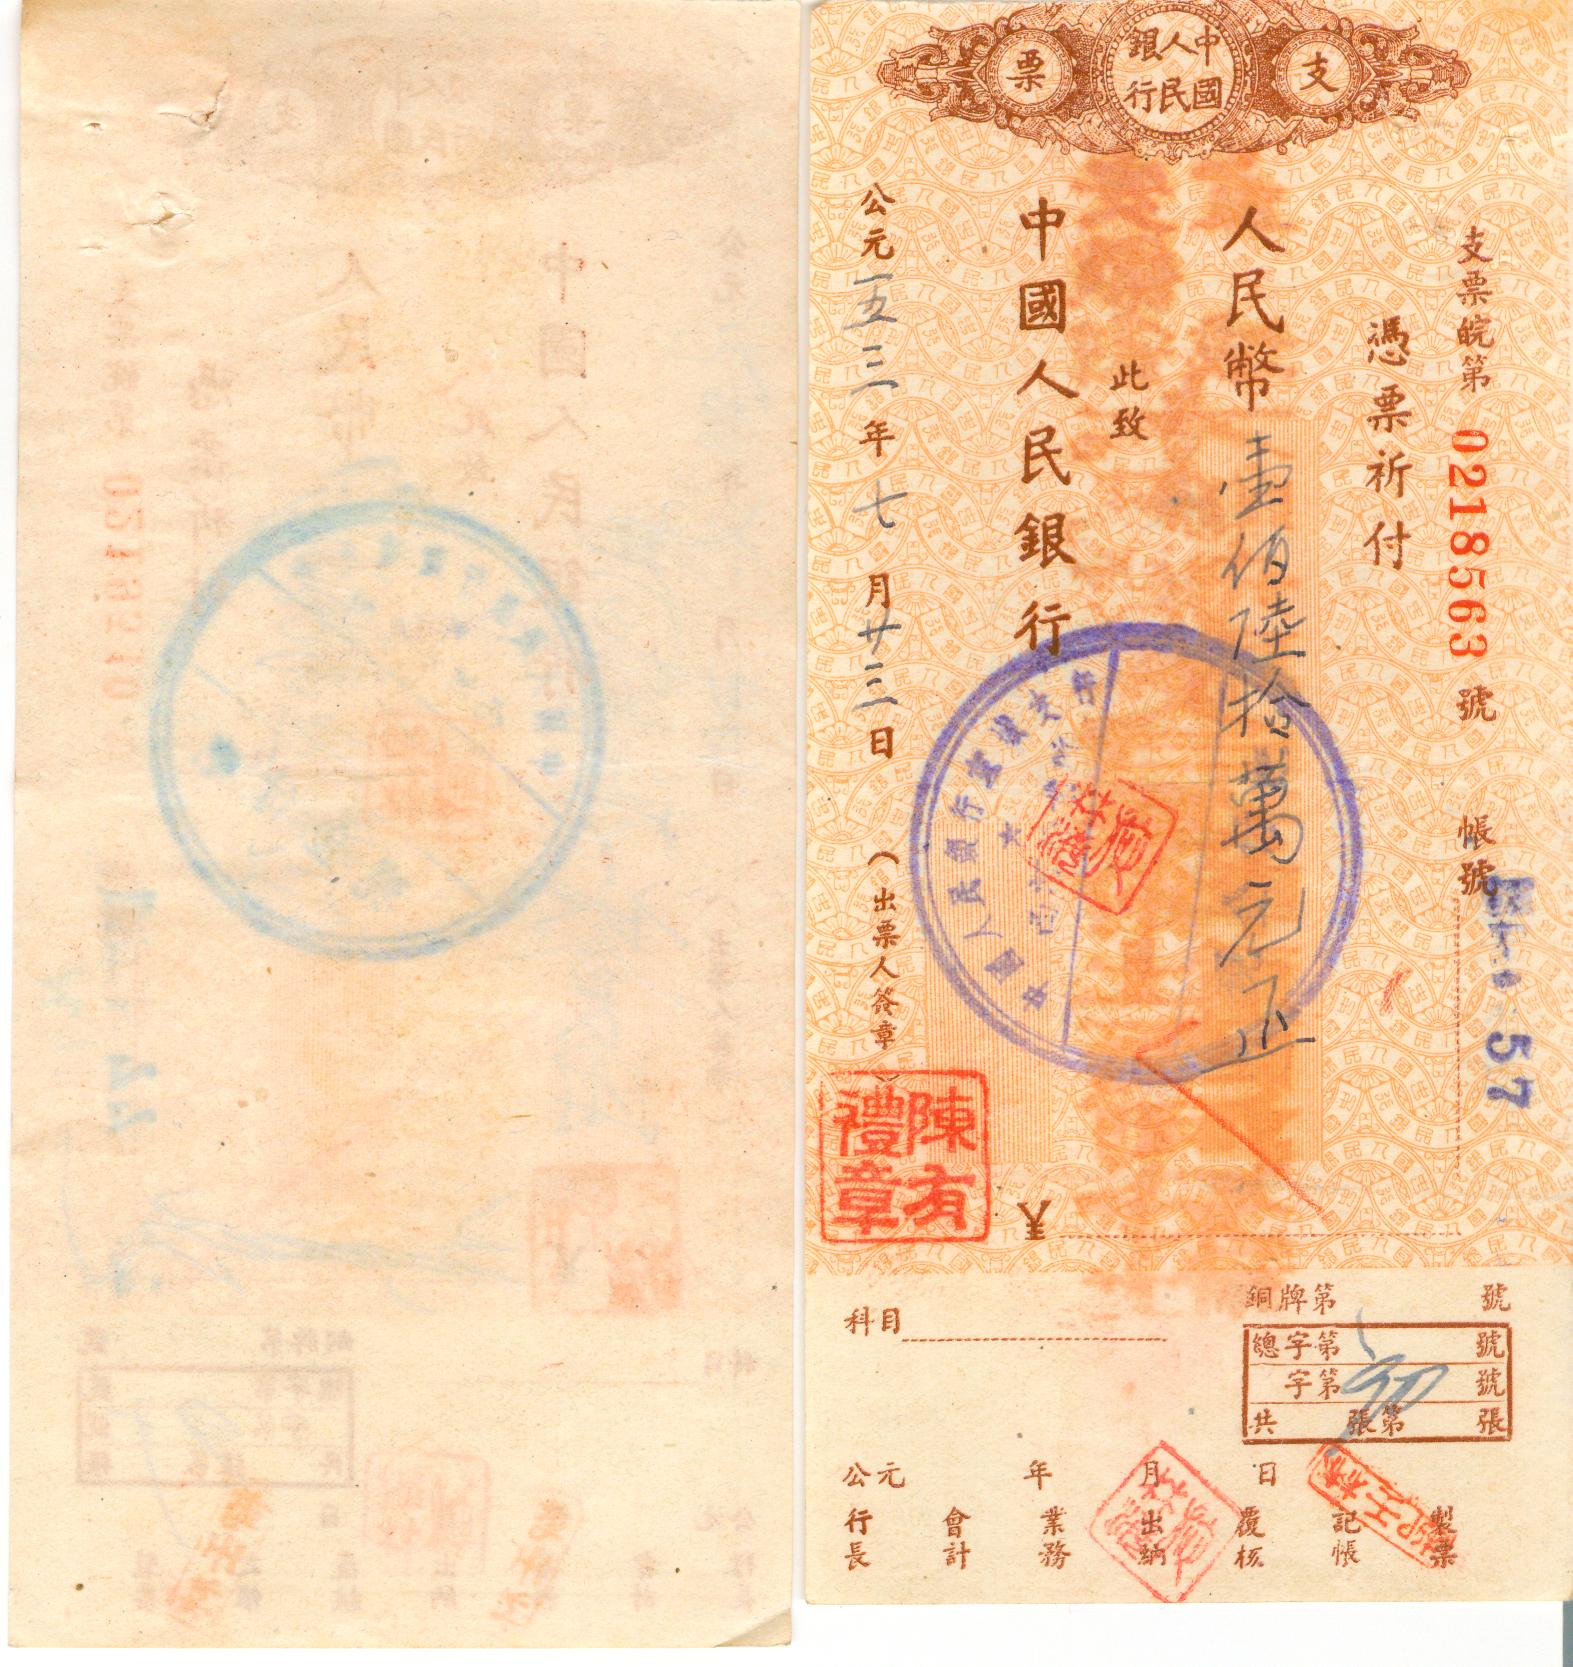 D1107, People's Bank of China, Check of 1952, Anhui Province